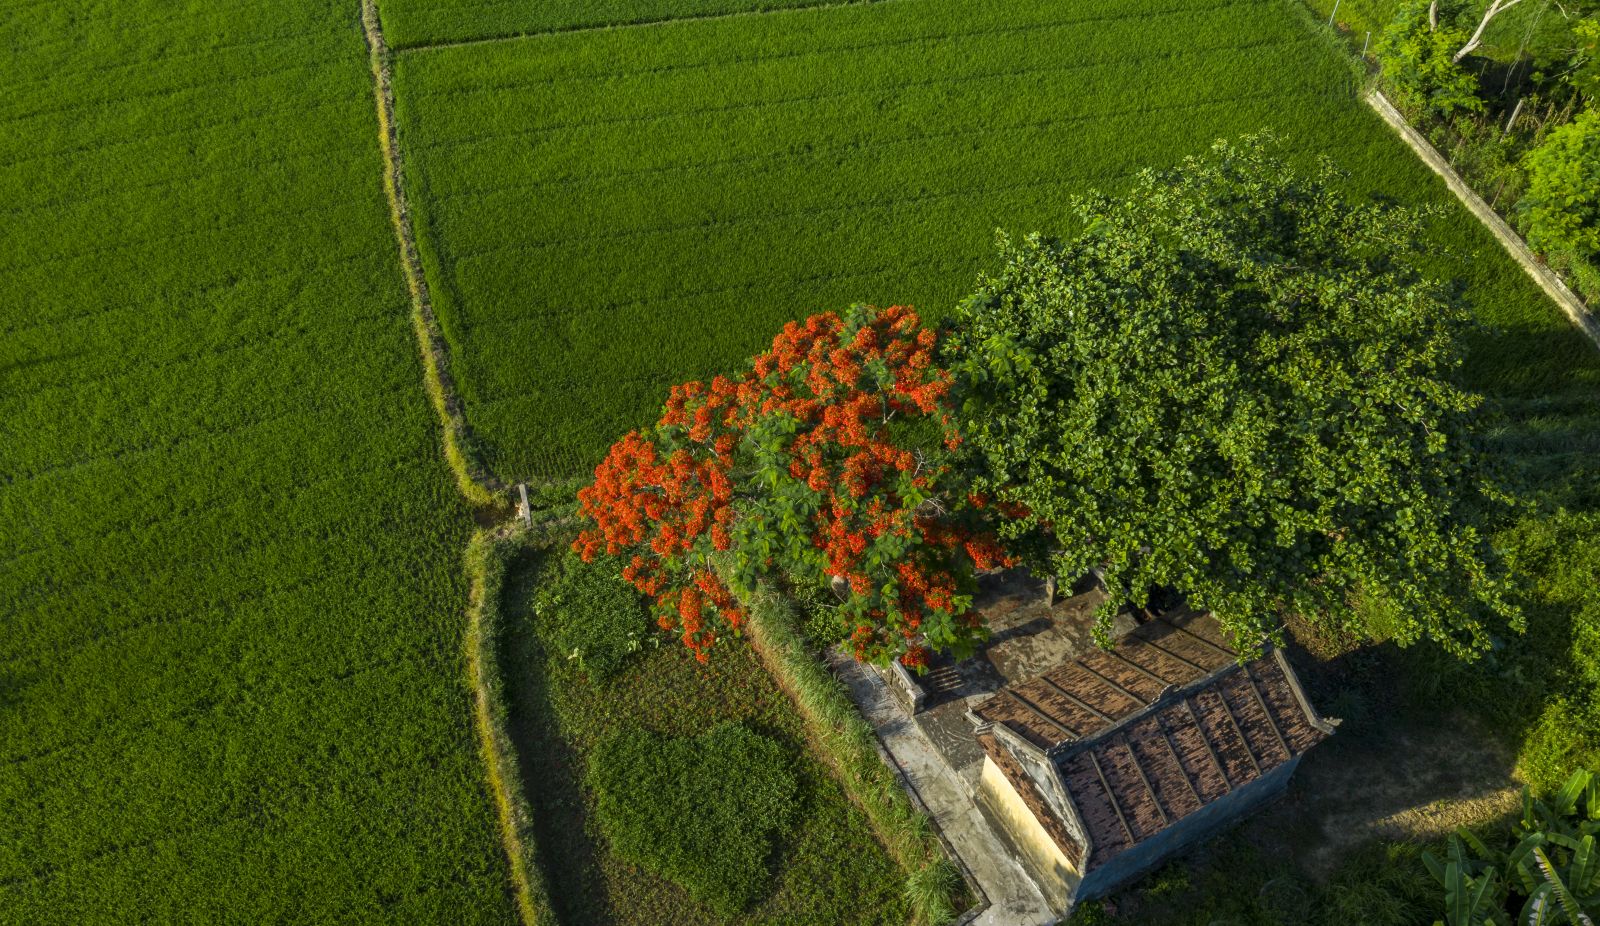 The flamboyant tree in the middle of the field